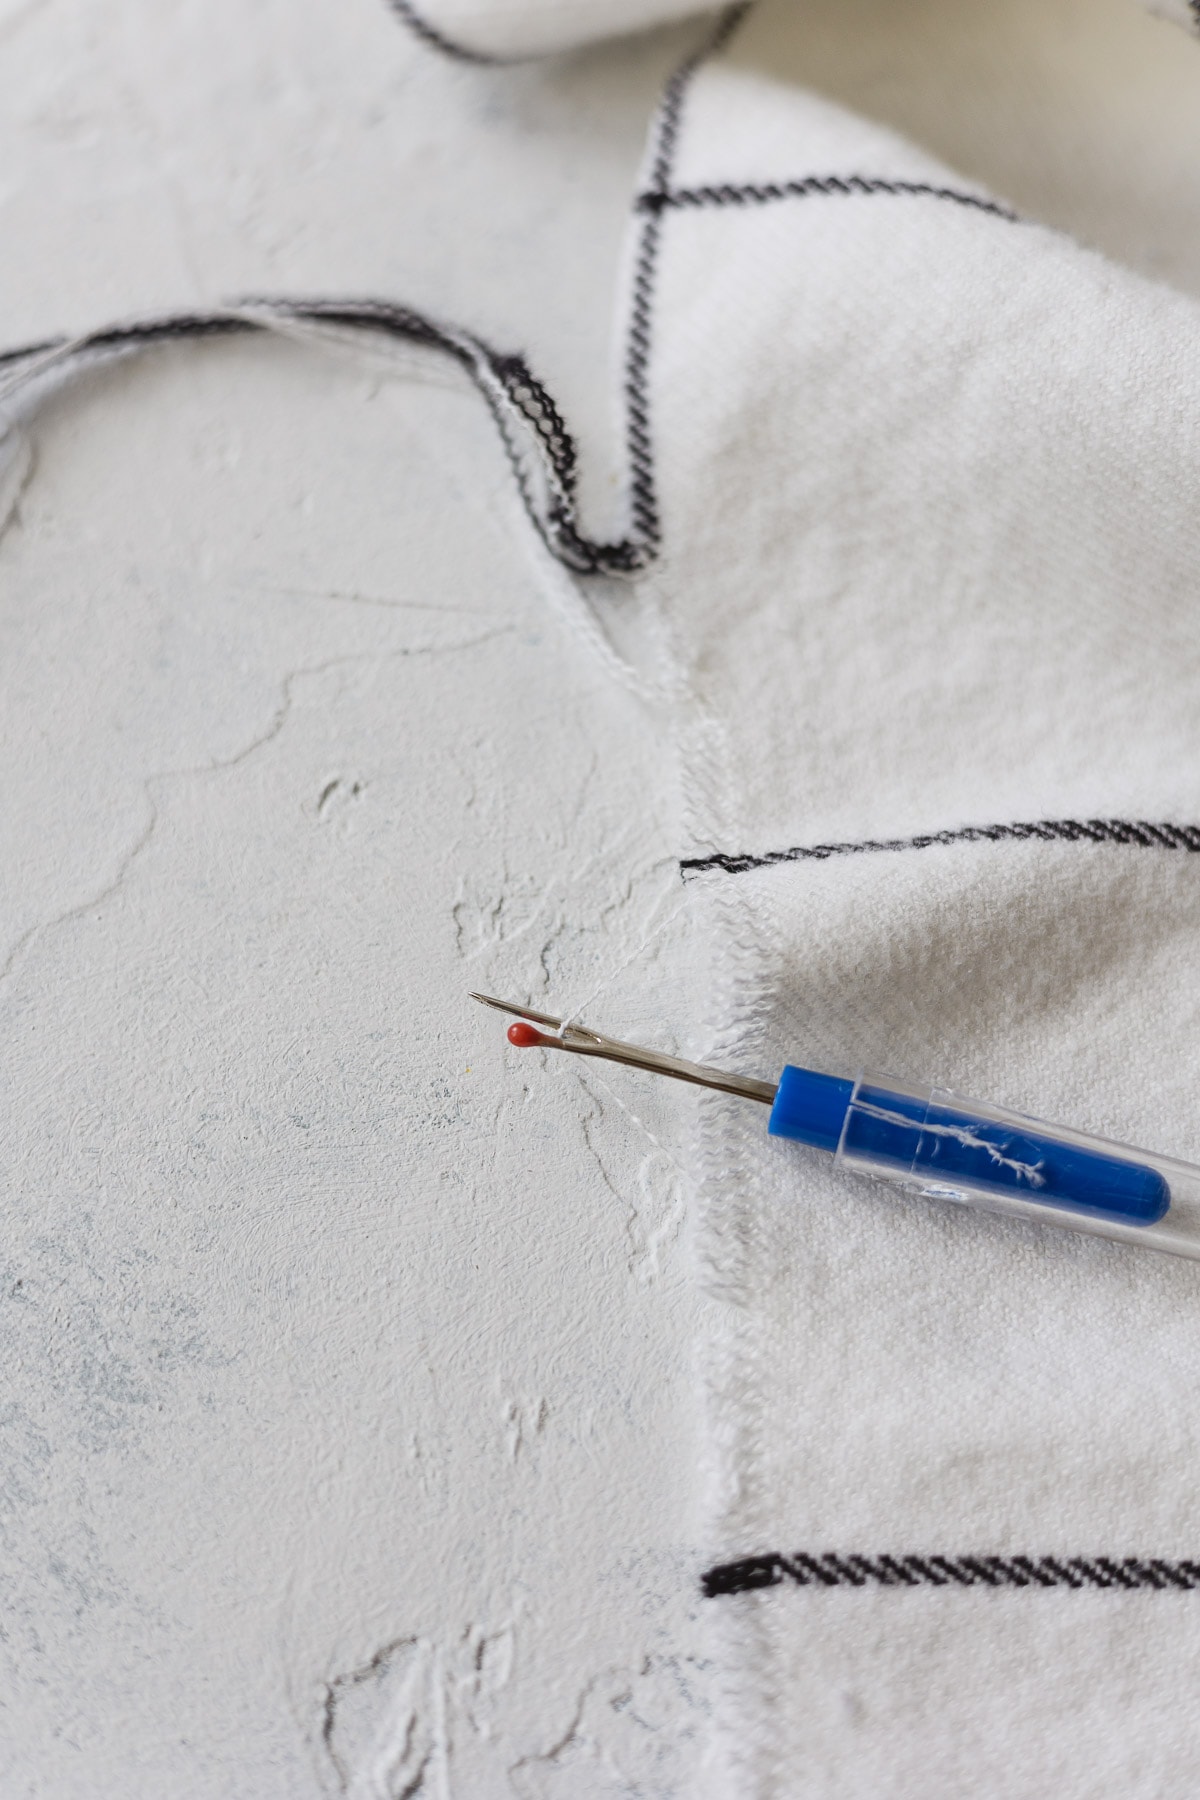 Using a small seam ripper to remove threads and fringe the edge of a DIY scarf.